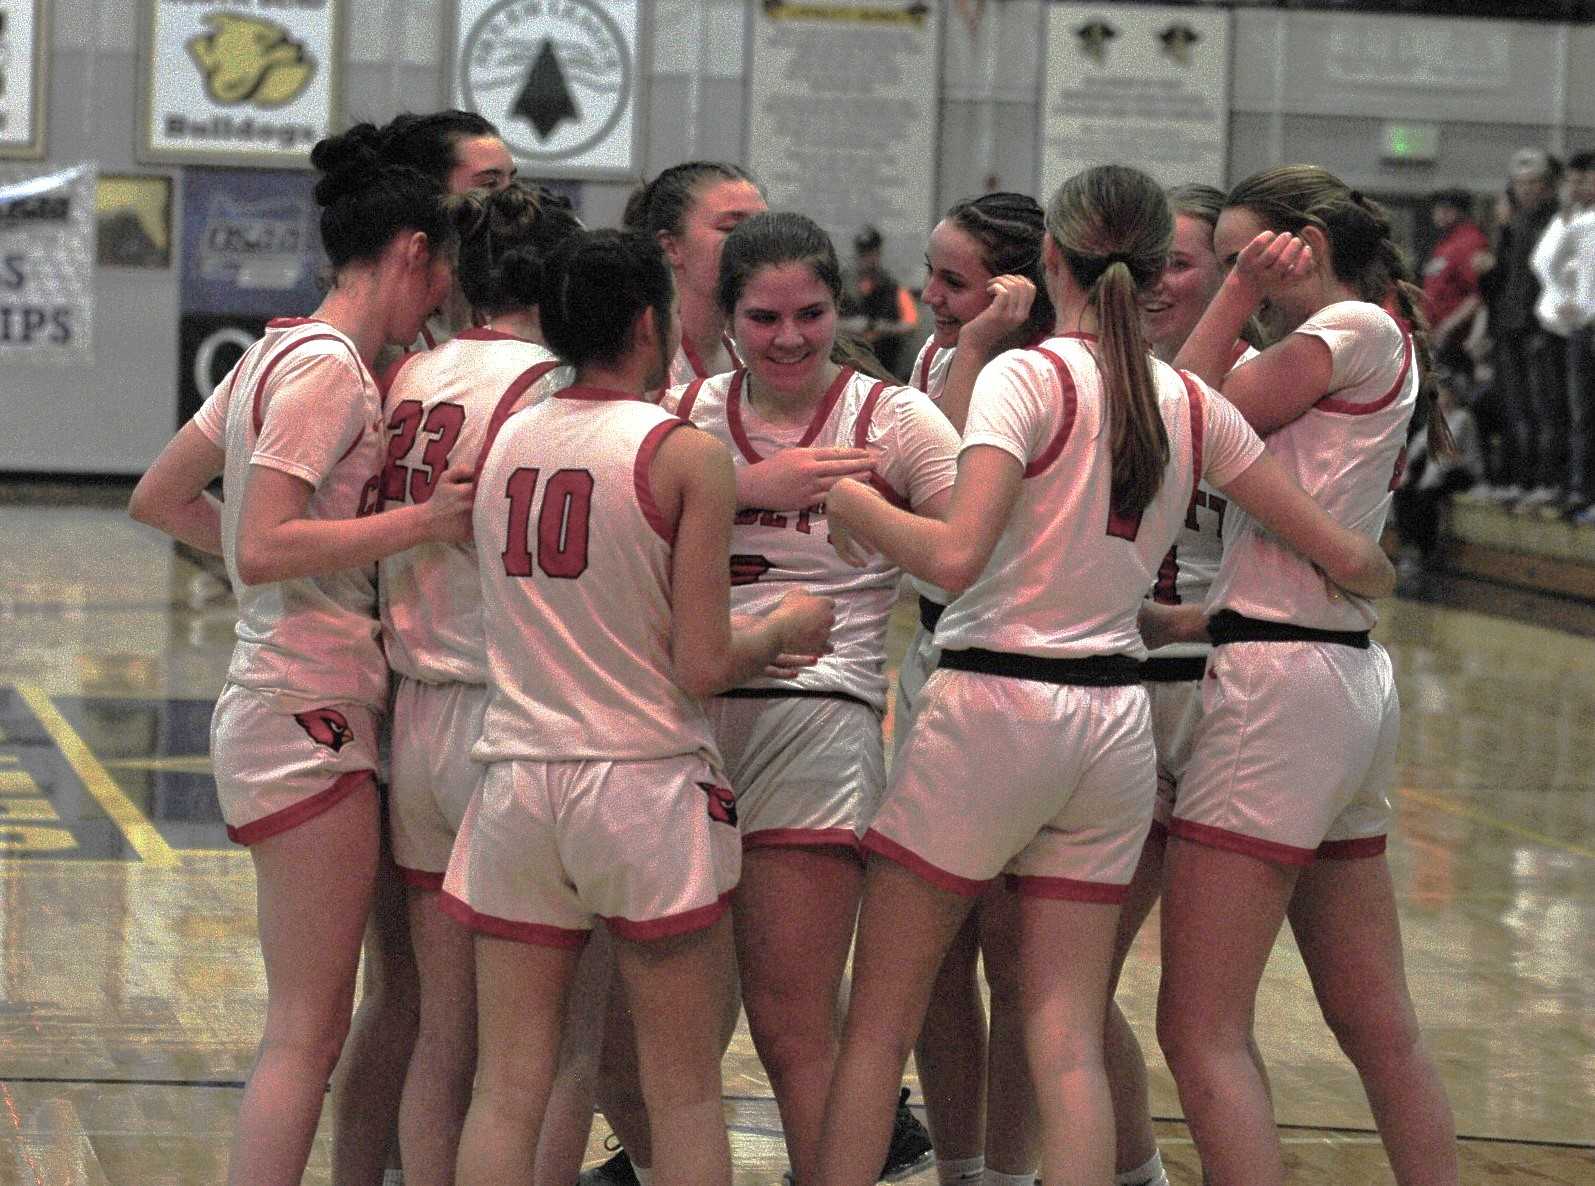 Corbett players celebrate around Carly Hardie after her late free throw lifted the Cardinals over Vale. (Photo by John Gunther)